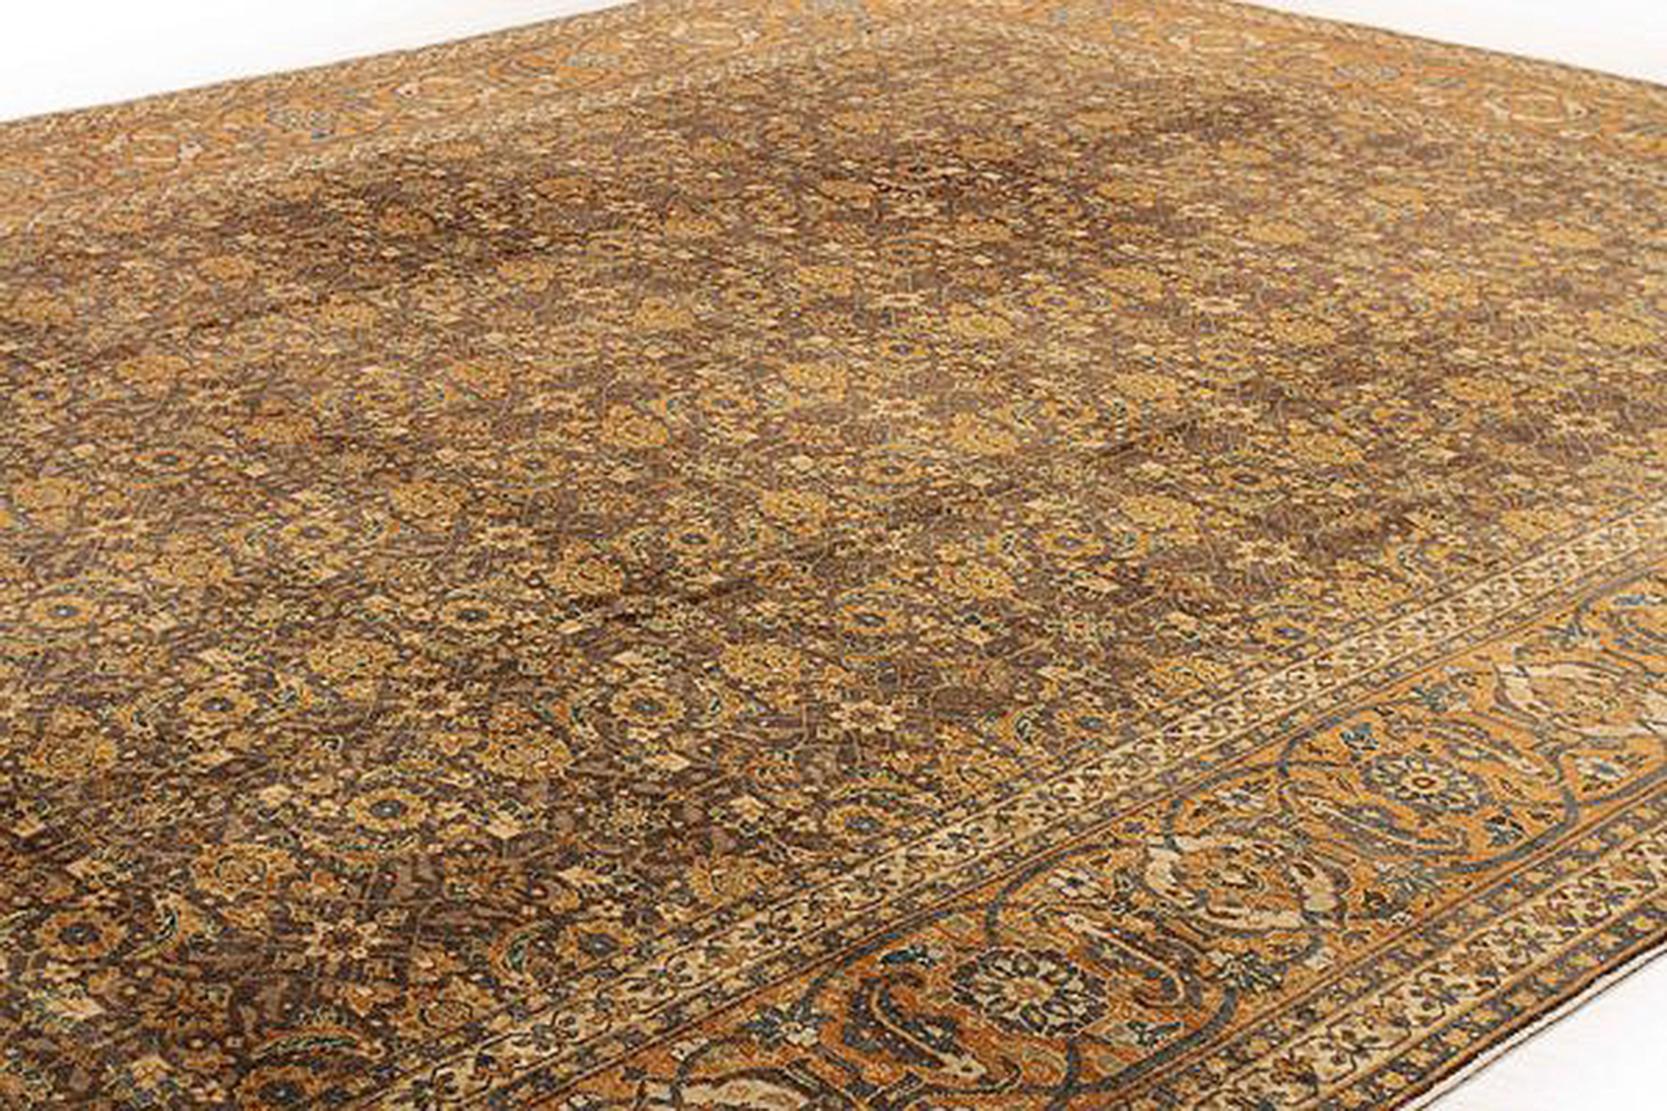 1910 Antique Persian Tabriz Rug with Beige & Rust Flower Details on Brown Field In Excellent Condition For Sale In Dallas, TX